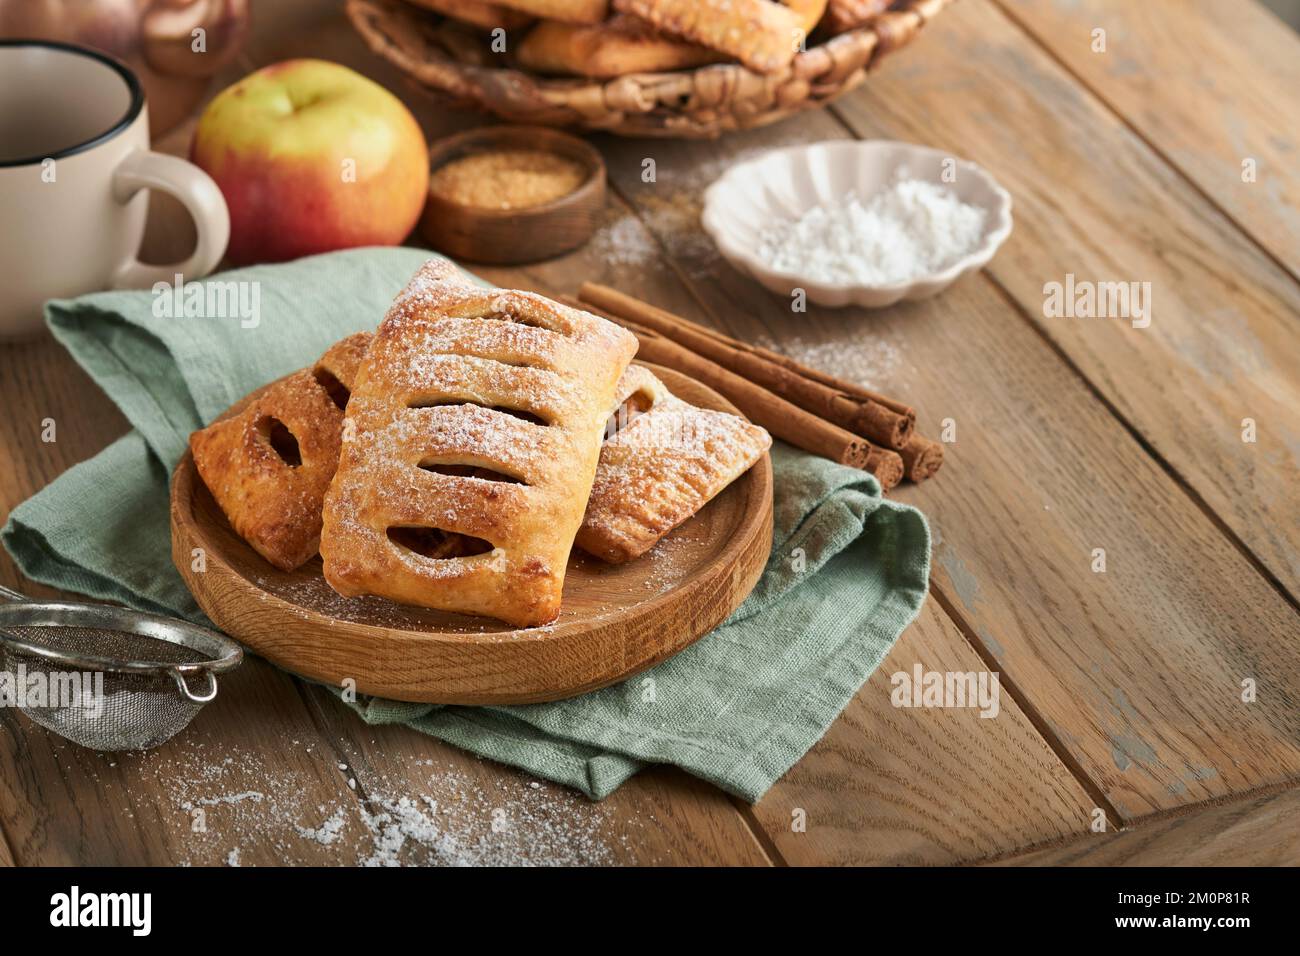 Hand pies. Mini puff pastry or hand pies stuffed with apple and sprinkle sugar powder in wooden plate. Homemade pie snack with crust for breakfast rus Stock Photo